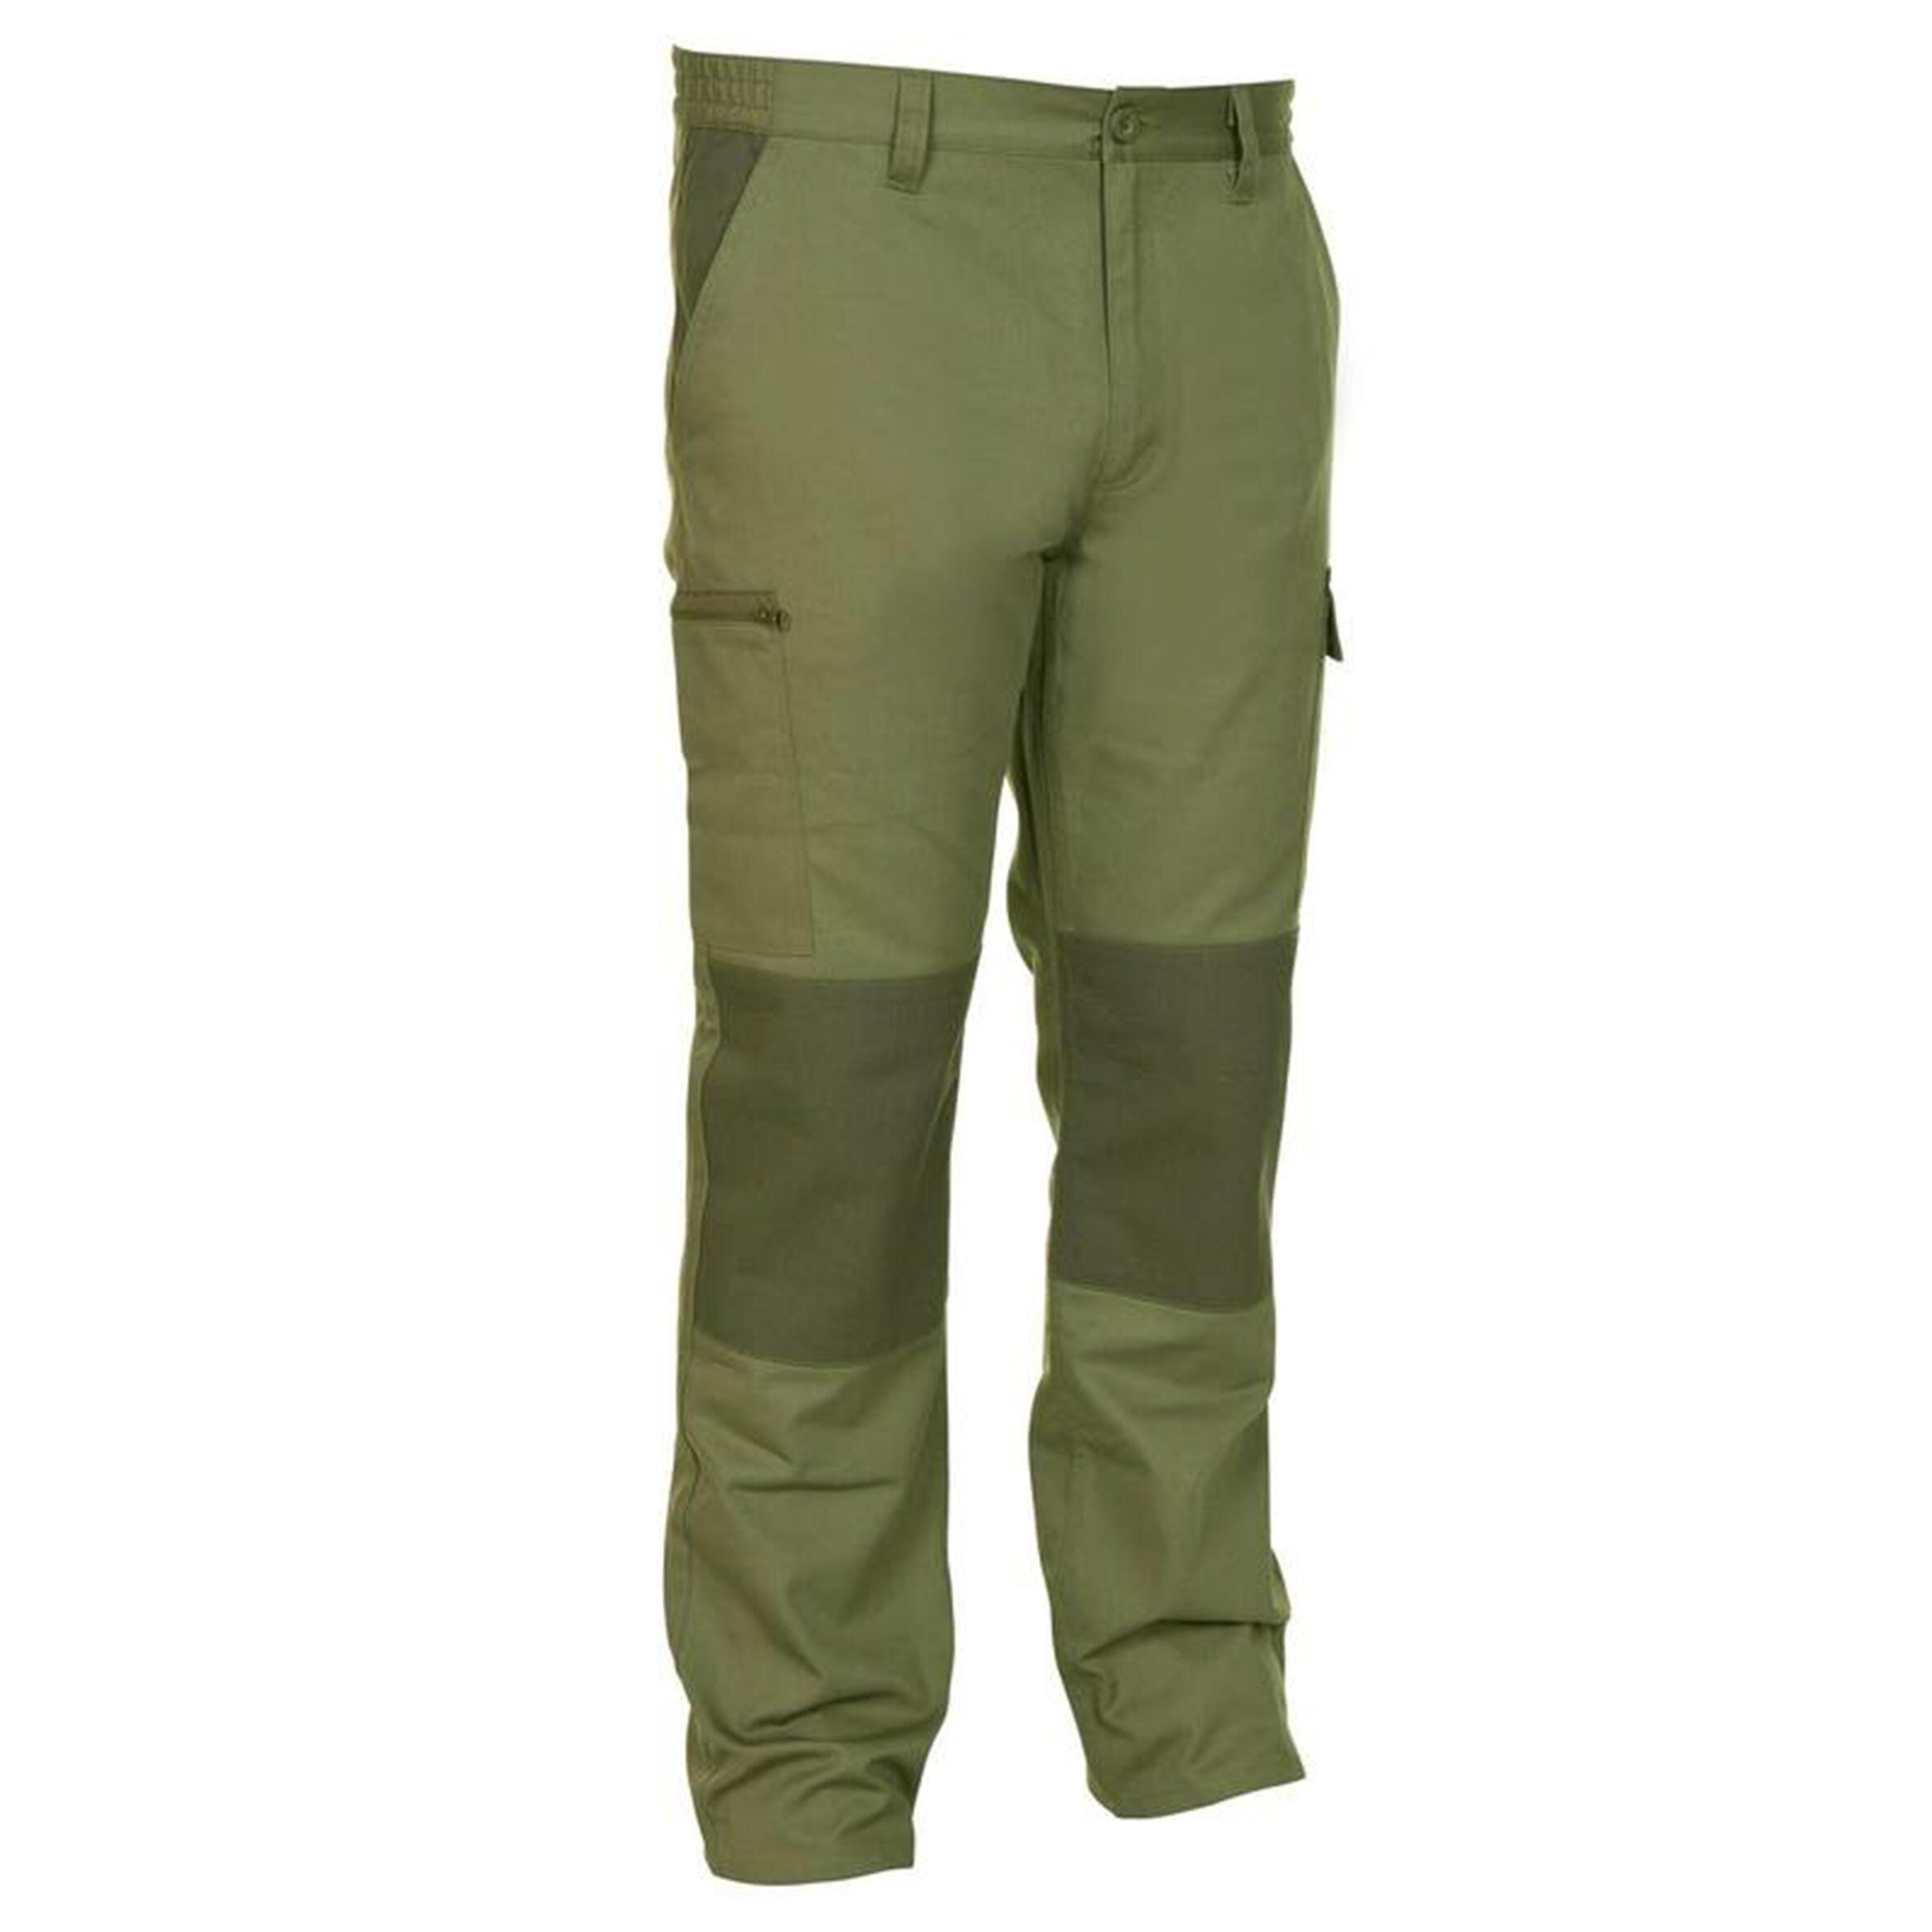 SOLOGNAC Steppe 300 Trousers Newwood - Buy SOLOGNAC Steppe 300 Trousers  Newwood Online at Best Prices in India on Snapdeal